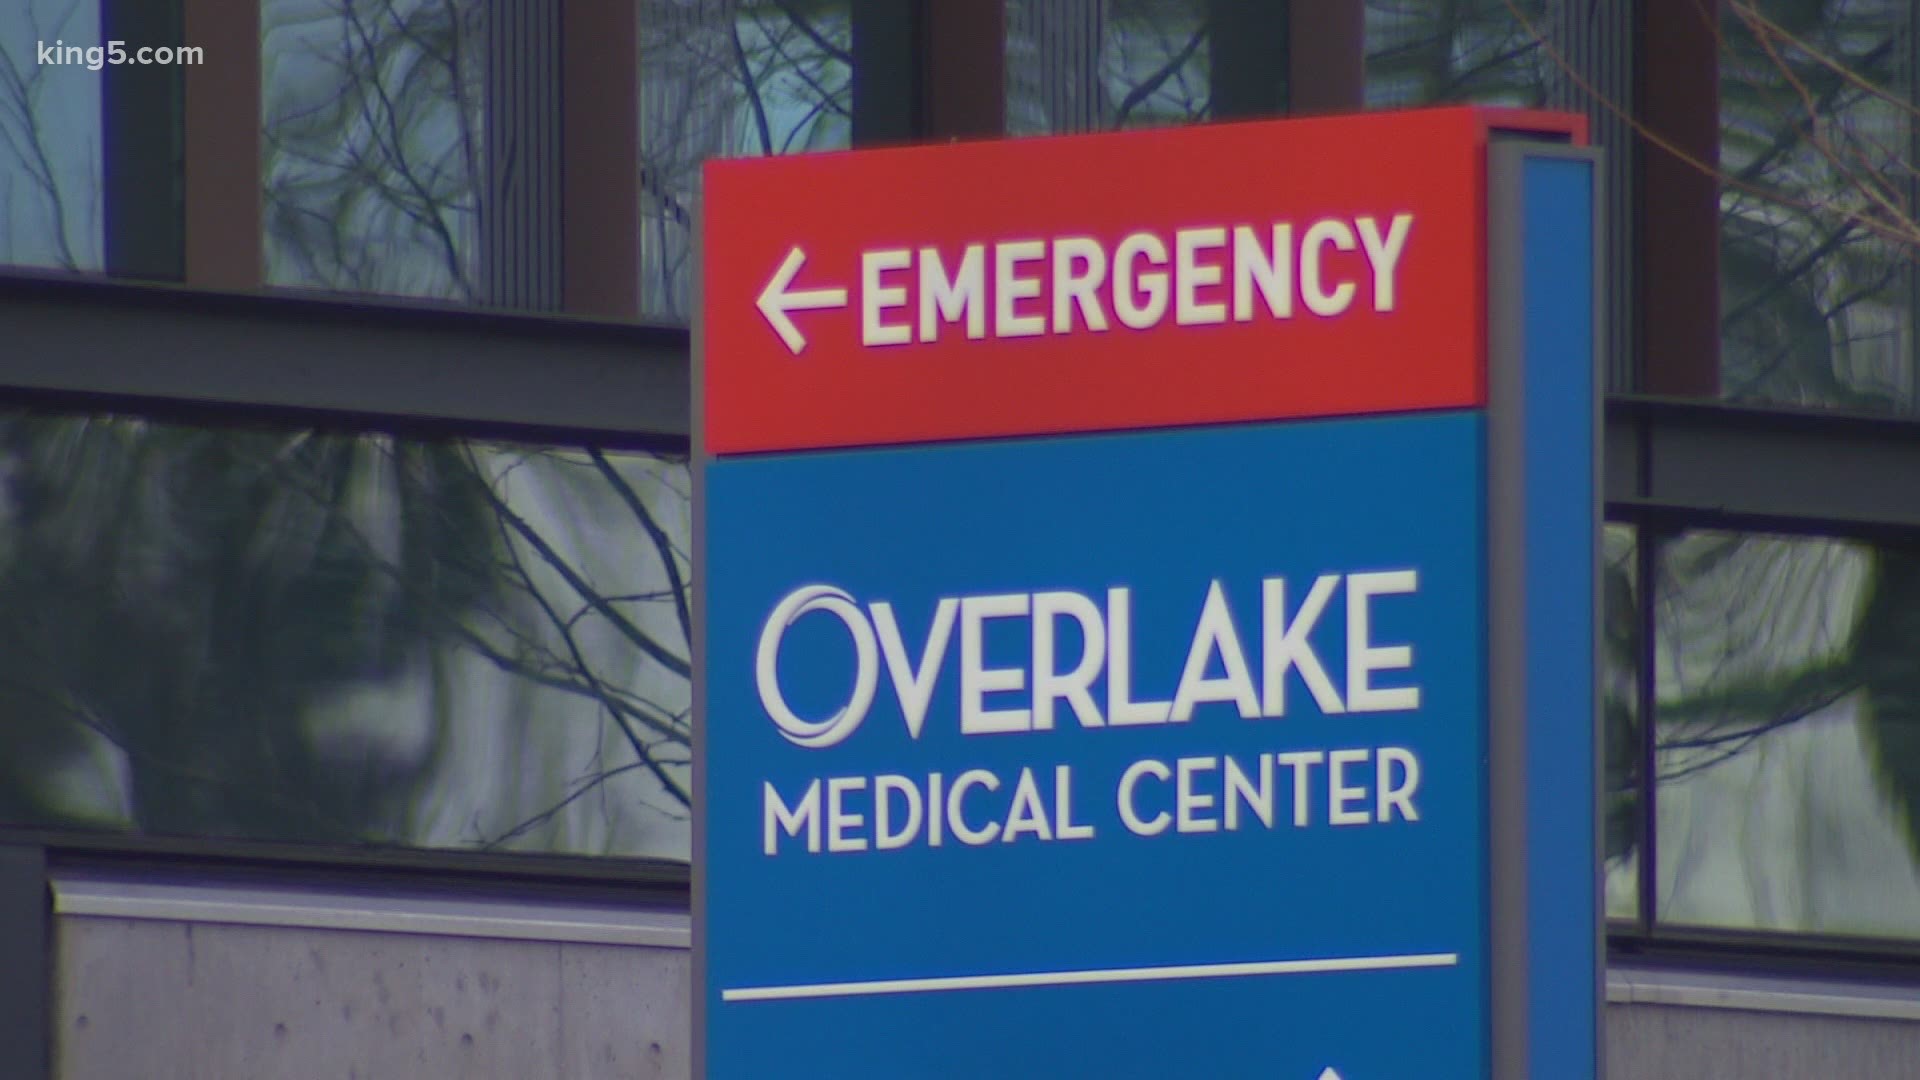 Bellevue's Overlake Medical Center is responding to questions about a massive invitation sent to thousands who, if qualified, could get a vaccine on short notice.